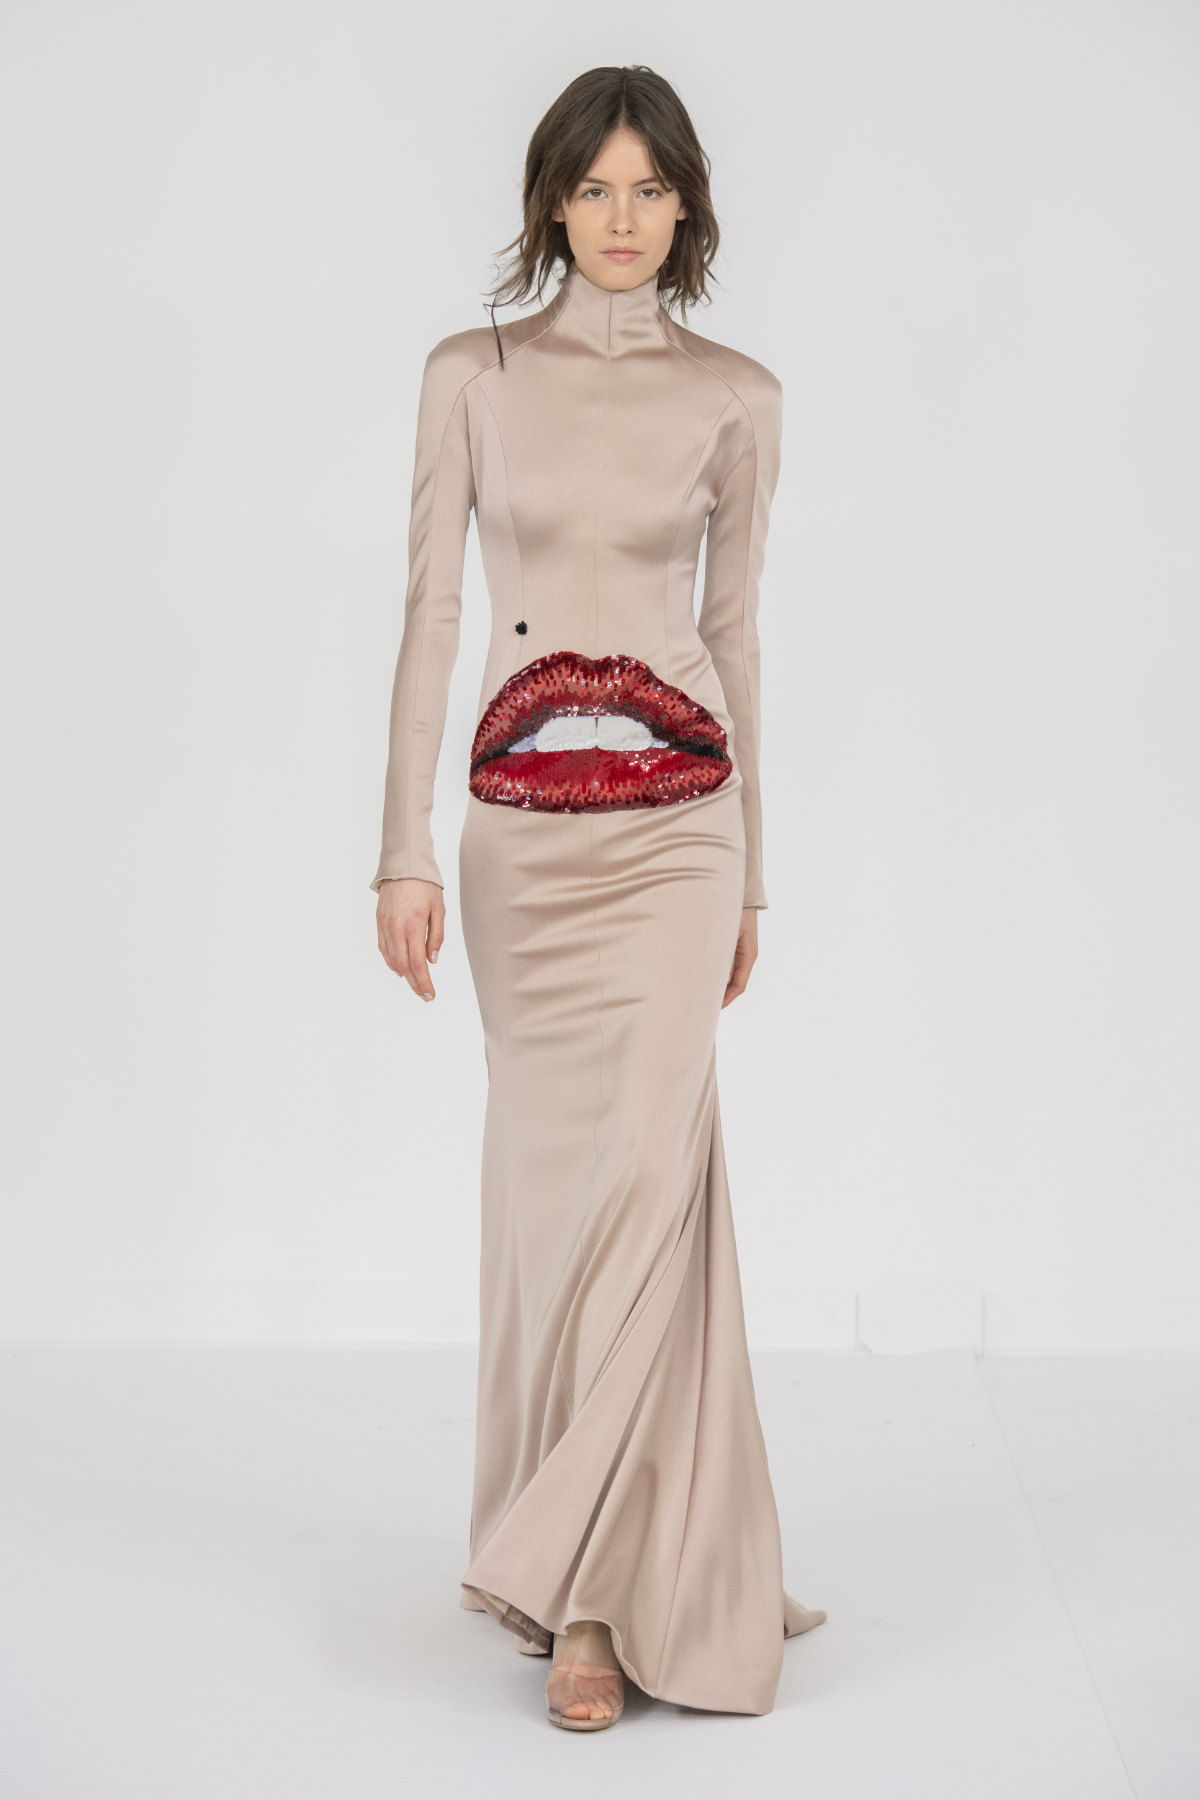 Alexis Mabille Presents His New Haute Couture Spring-Summer 2024 Collection: Mirror, Mirror